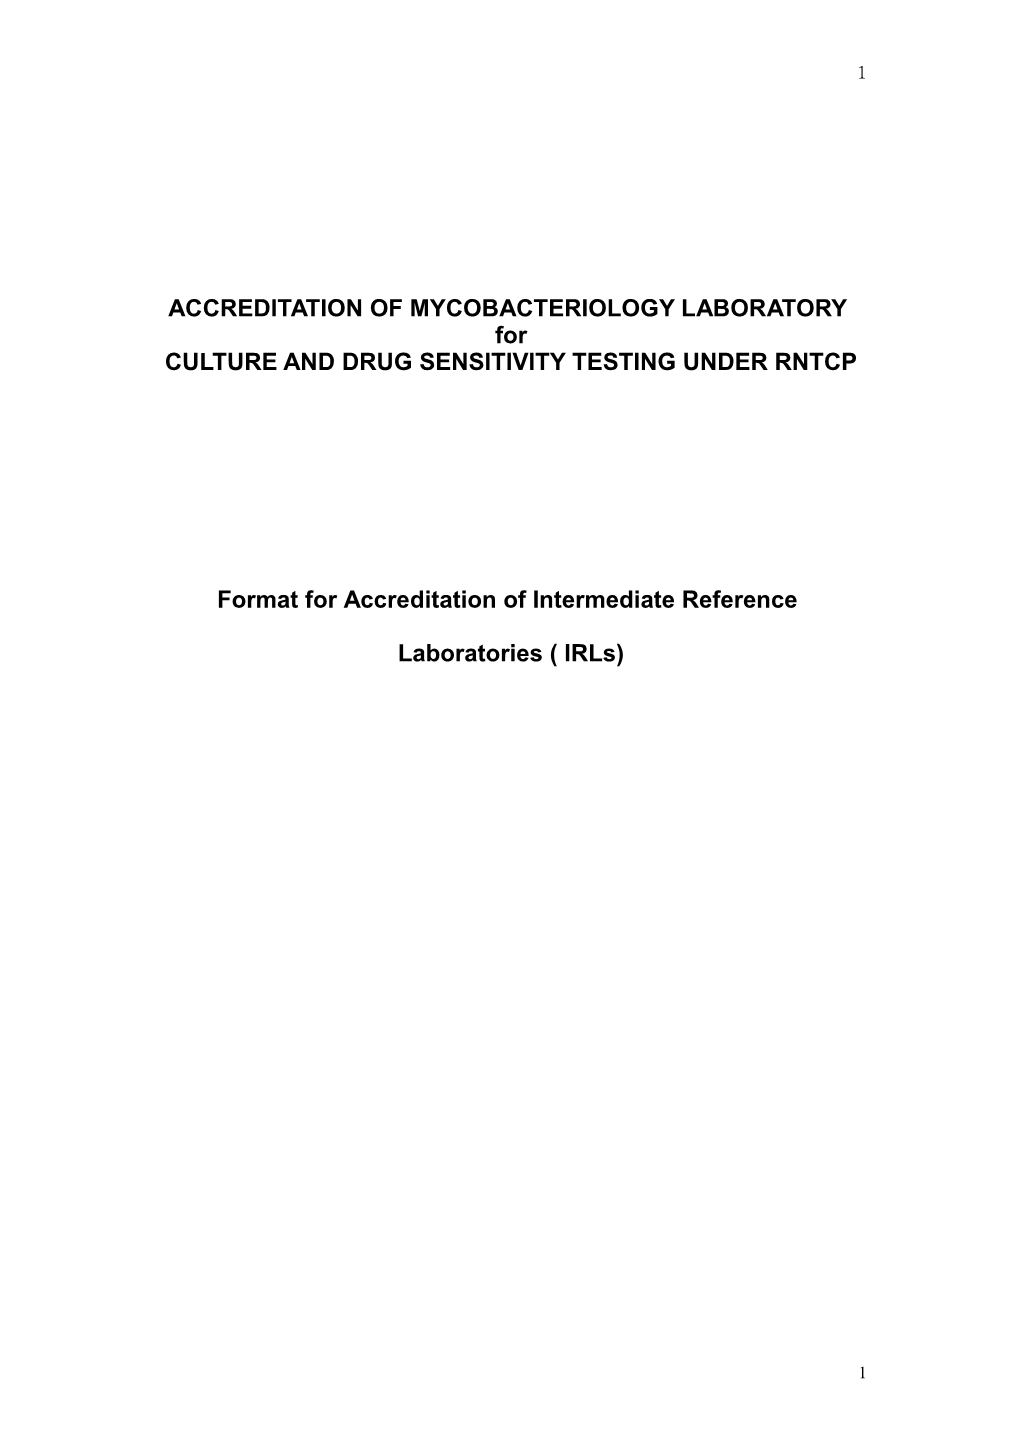 Accreditation of Irls for Culture and DST Under RNTCP: Plans, Processes and Time Frame